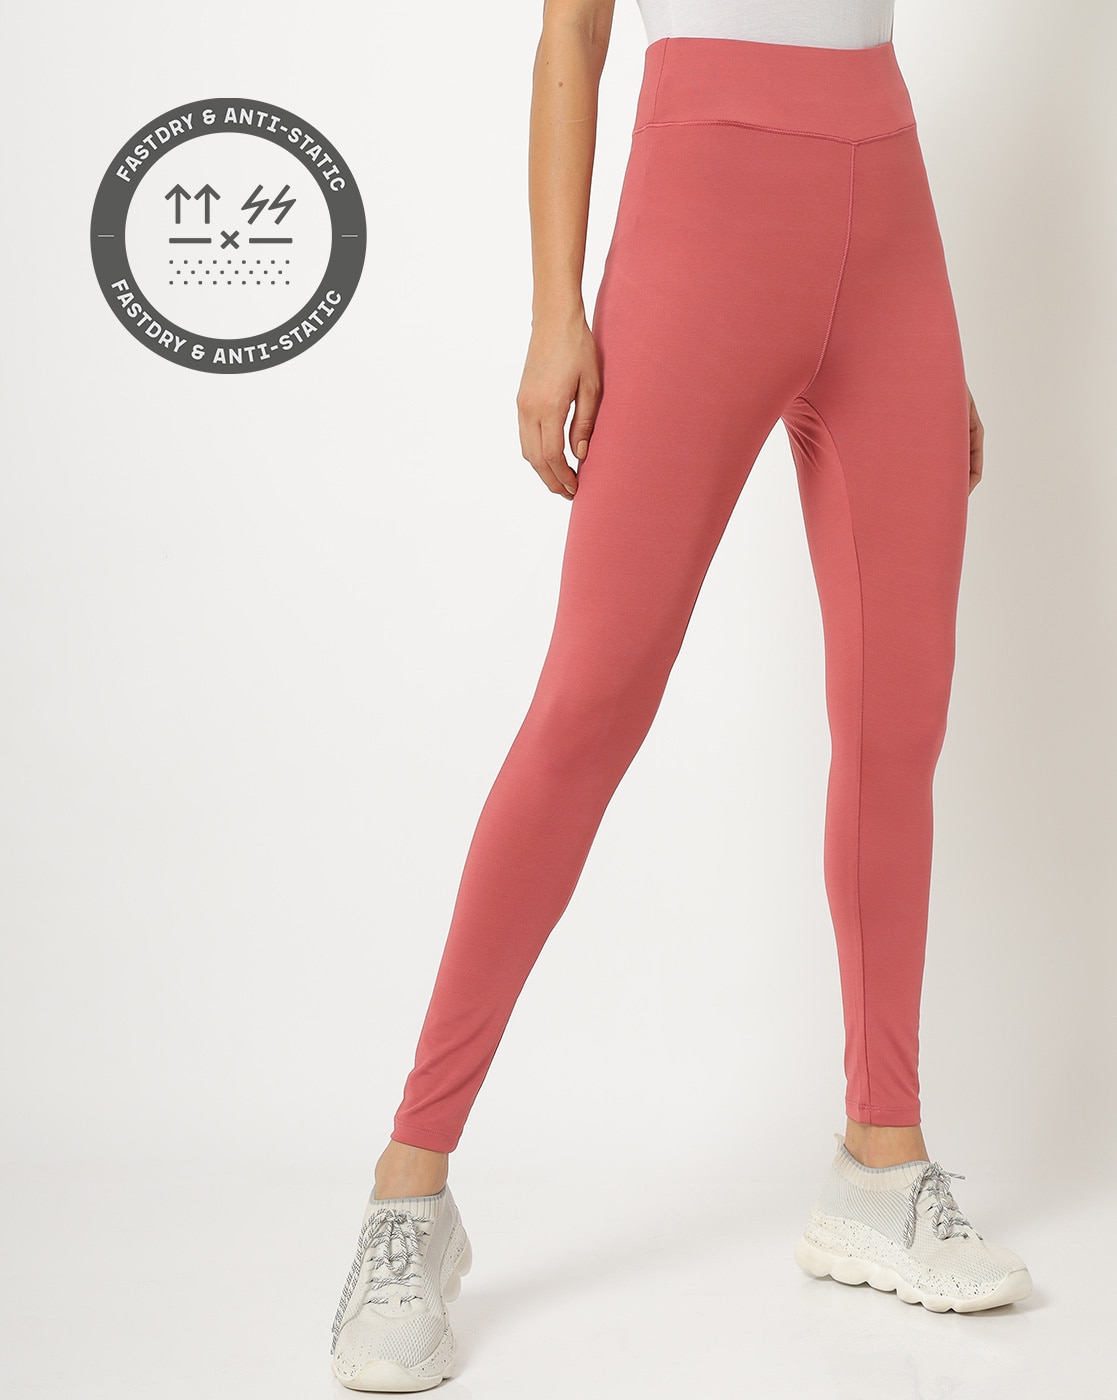 Quickdry Workout Tights